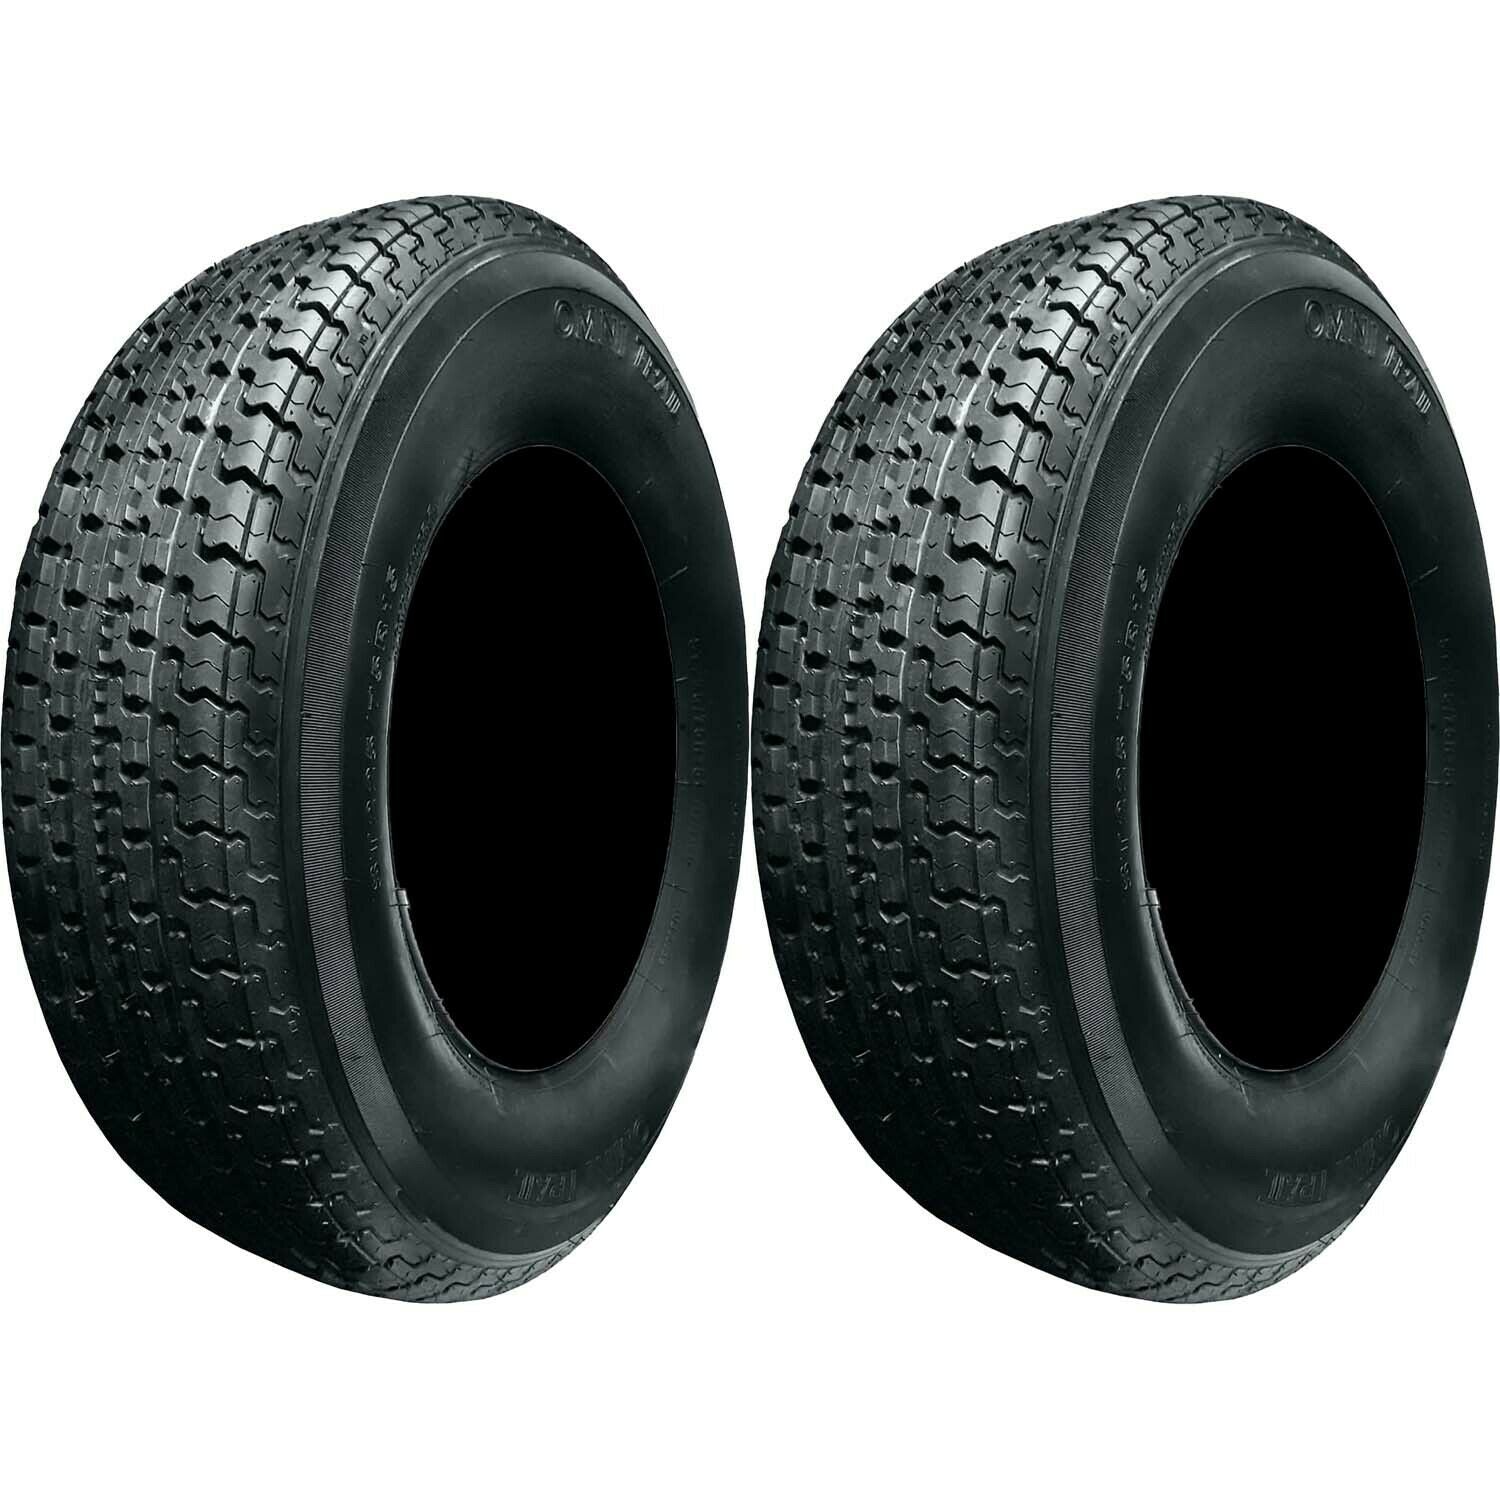 Omni Trail Radial Trailer Tire LRE 10ply ST225/75R15 Pack of 2